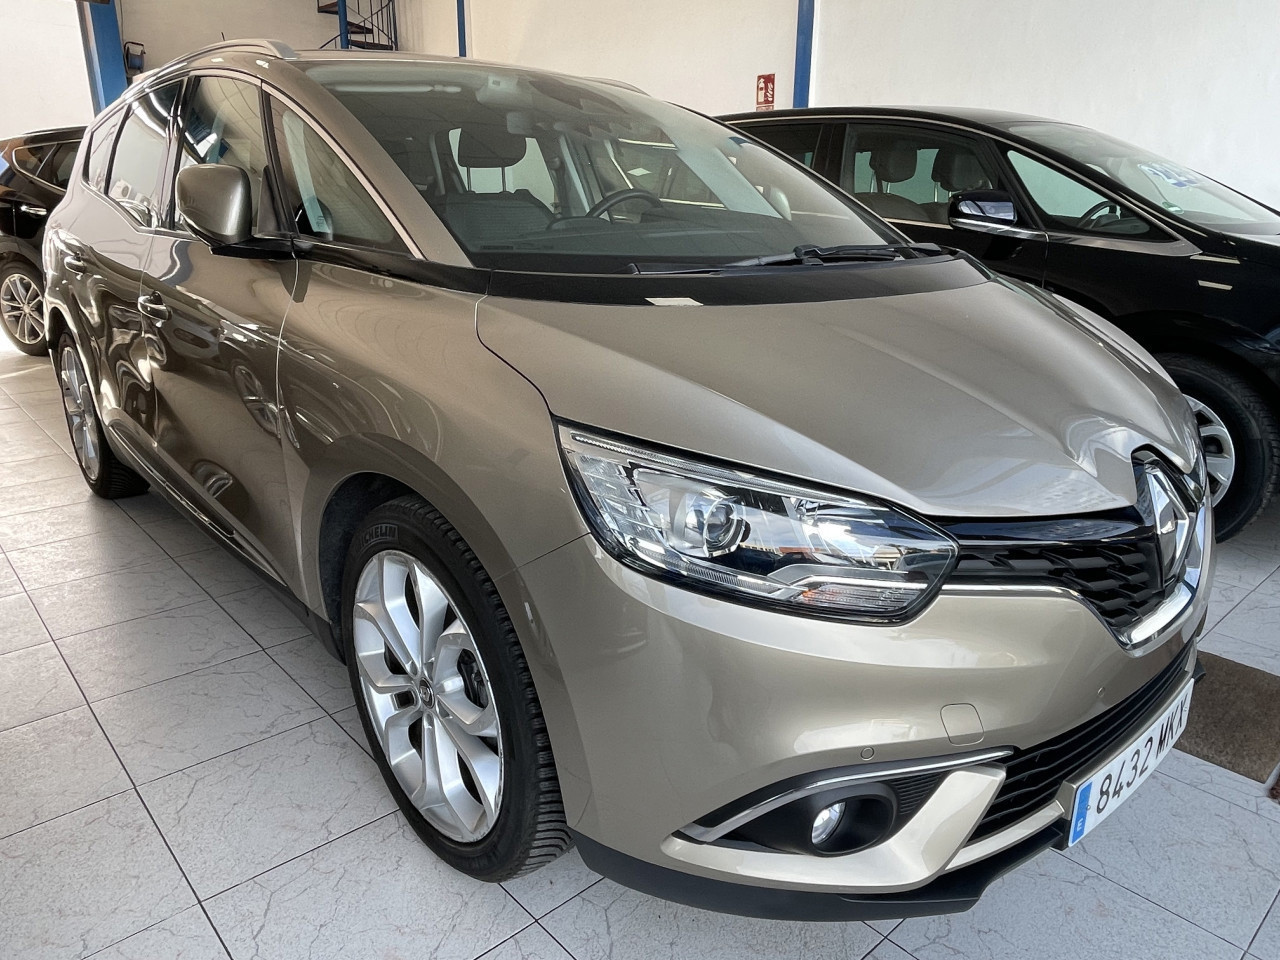 Renault Grand Scenic 1.5 Dci Automatic People carrier 2018 